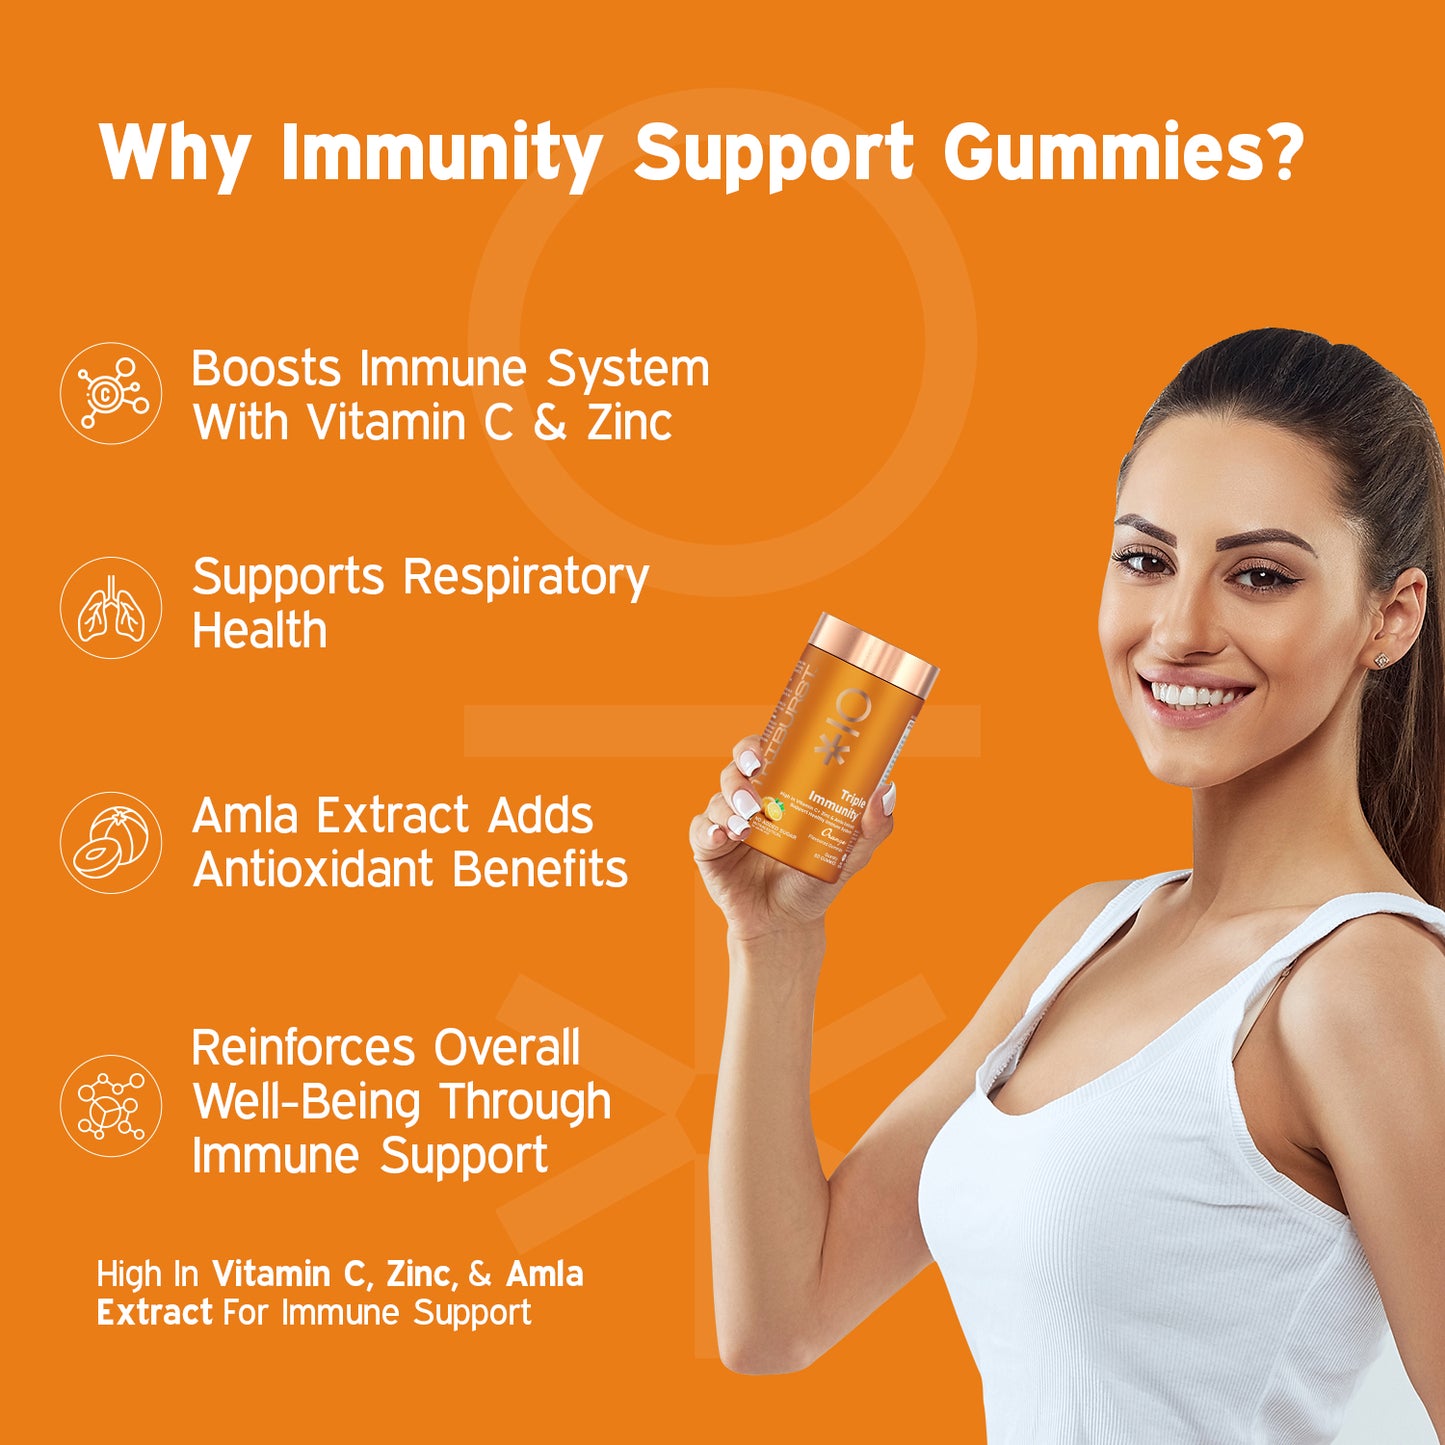 The Vitality Booster - Turmeric Ultra and Triple Immunity Gummies ComboThe Vitality Booster